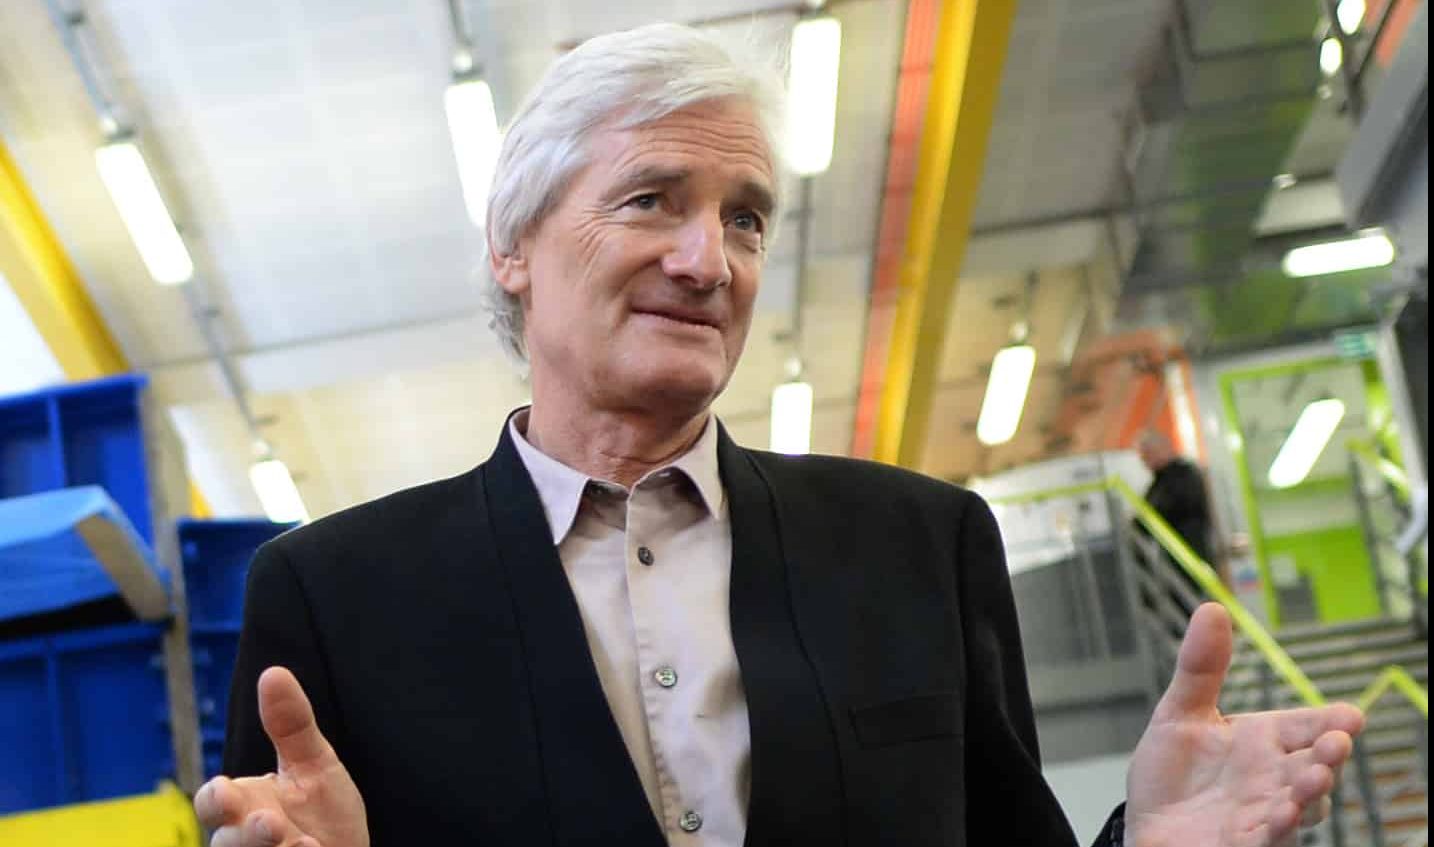 James Dyson torched on Twitter for claiming Brexit gives Brits ‘freedom’